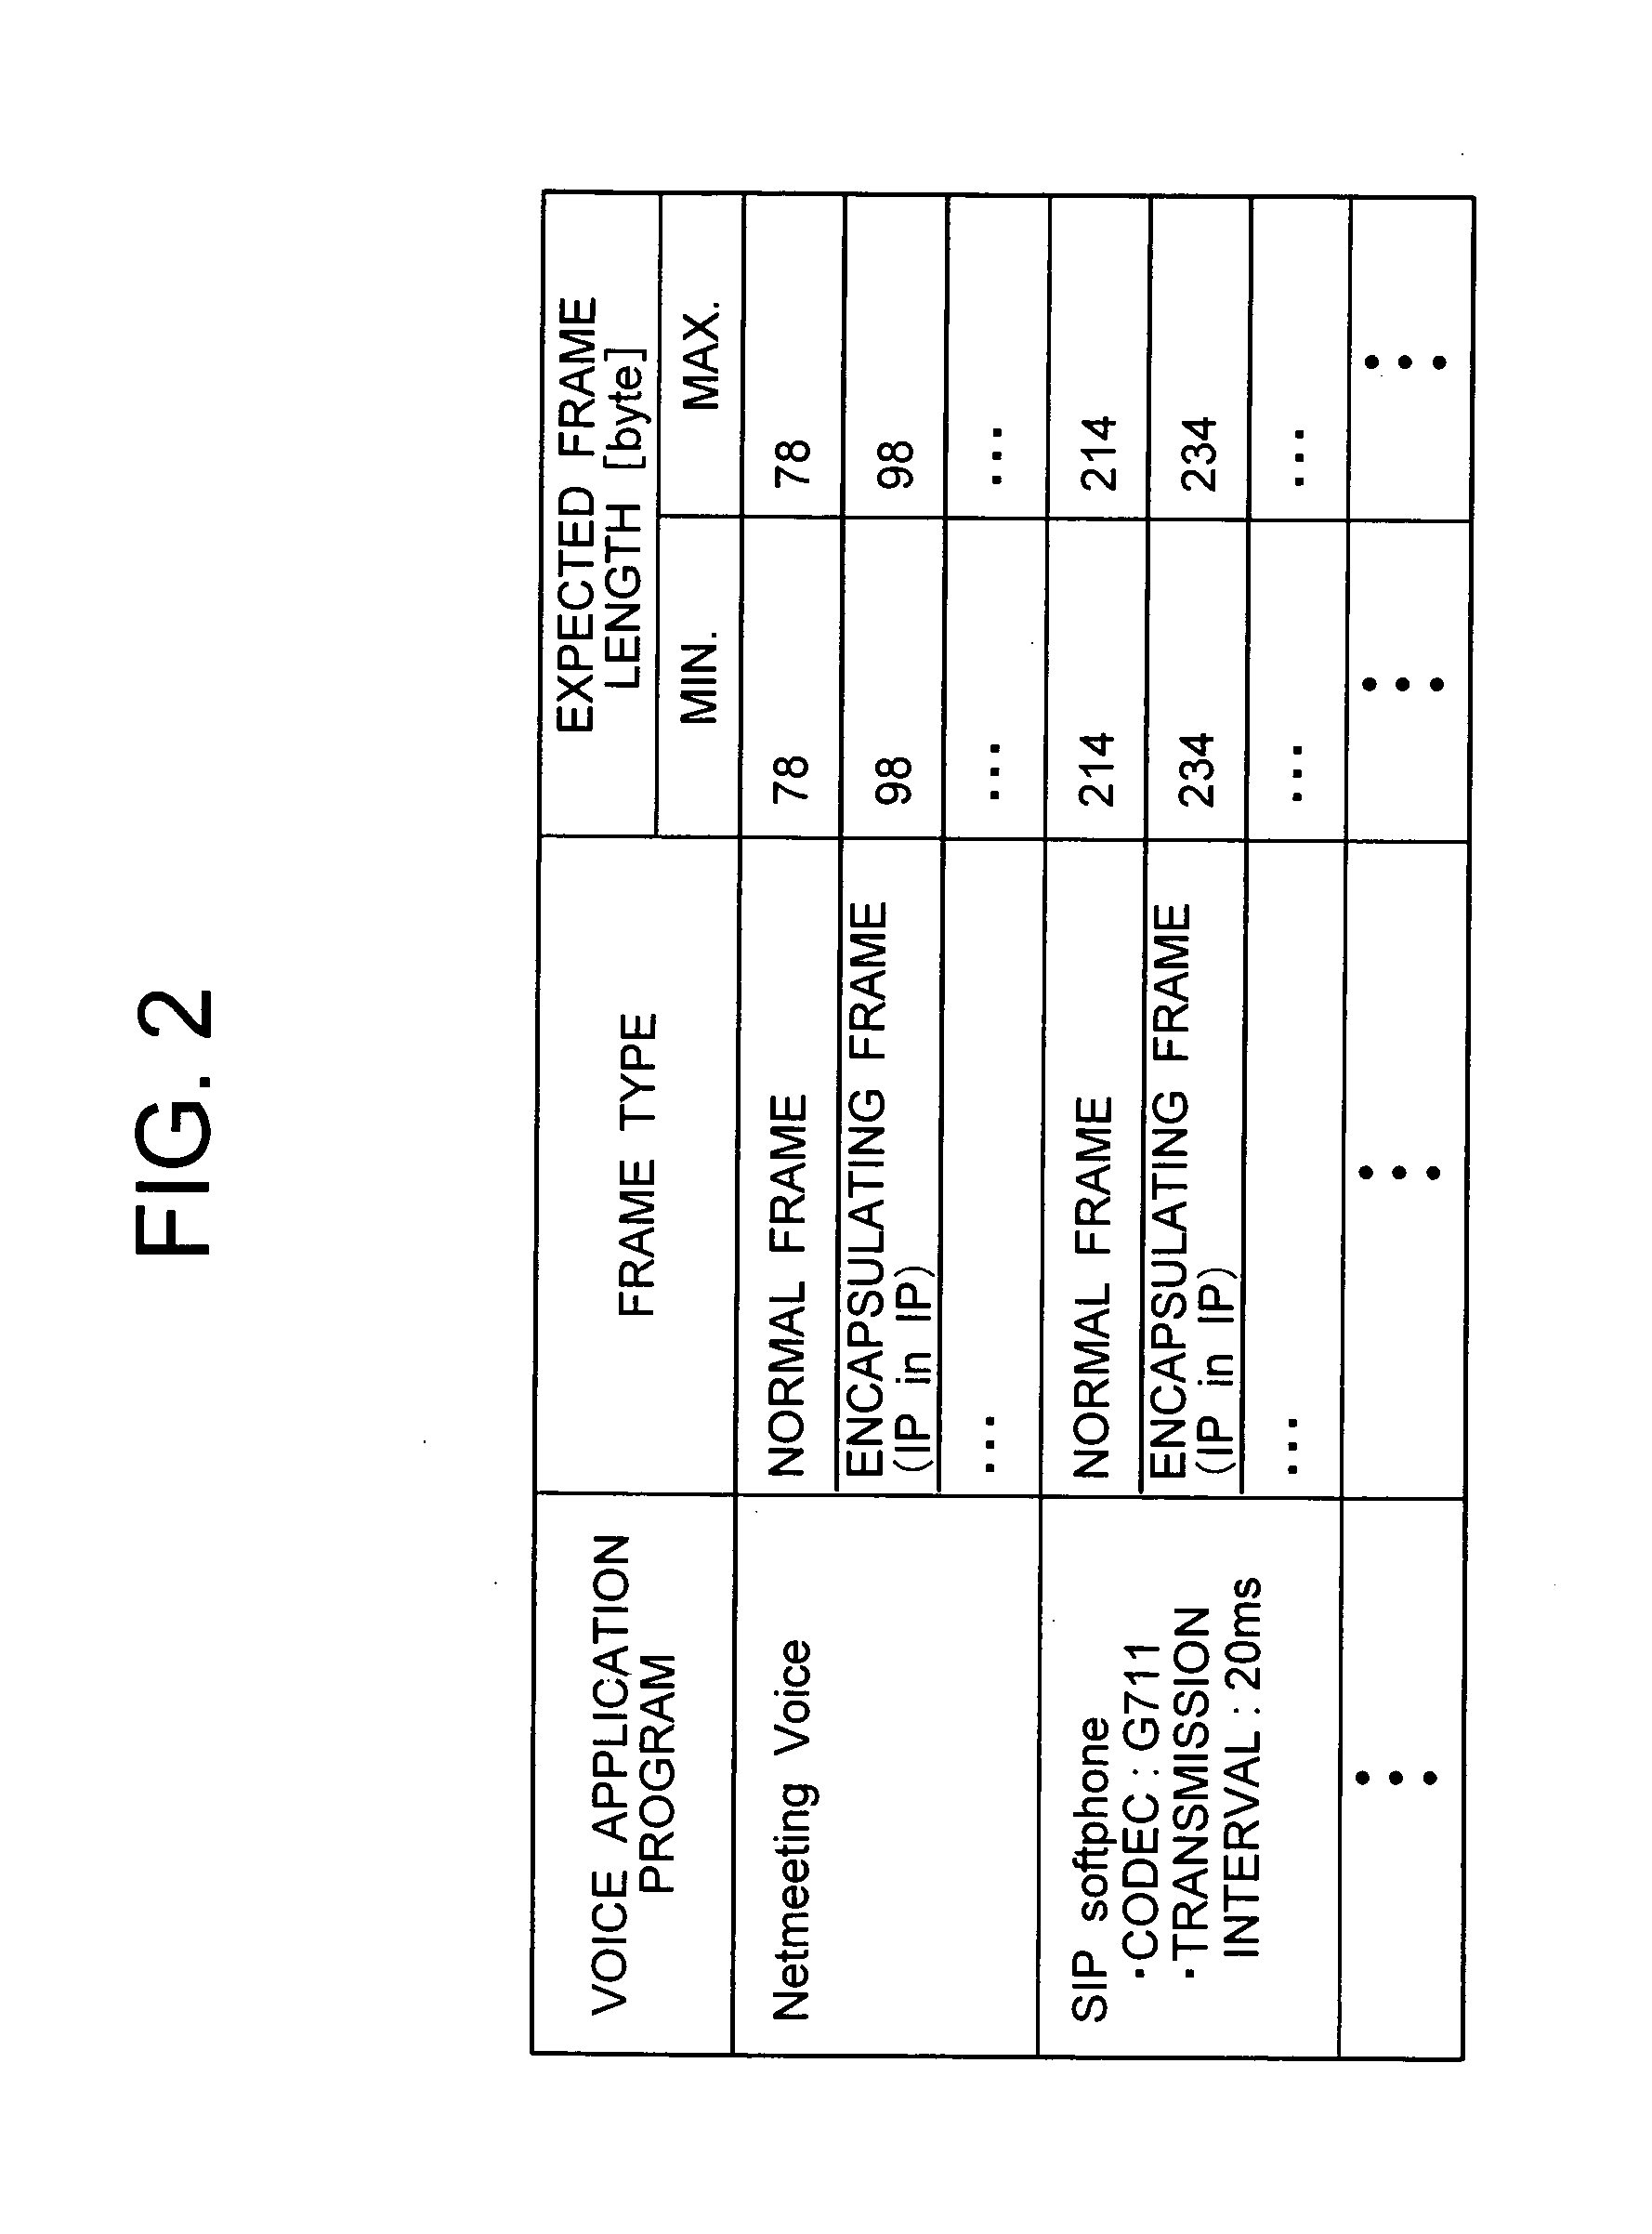 Traffic detection system and communication-quality monitoring system on a network